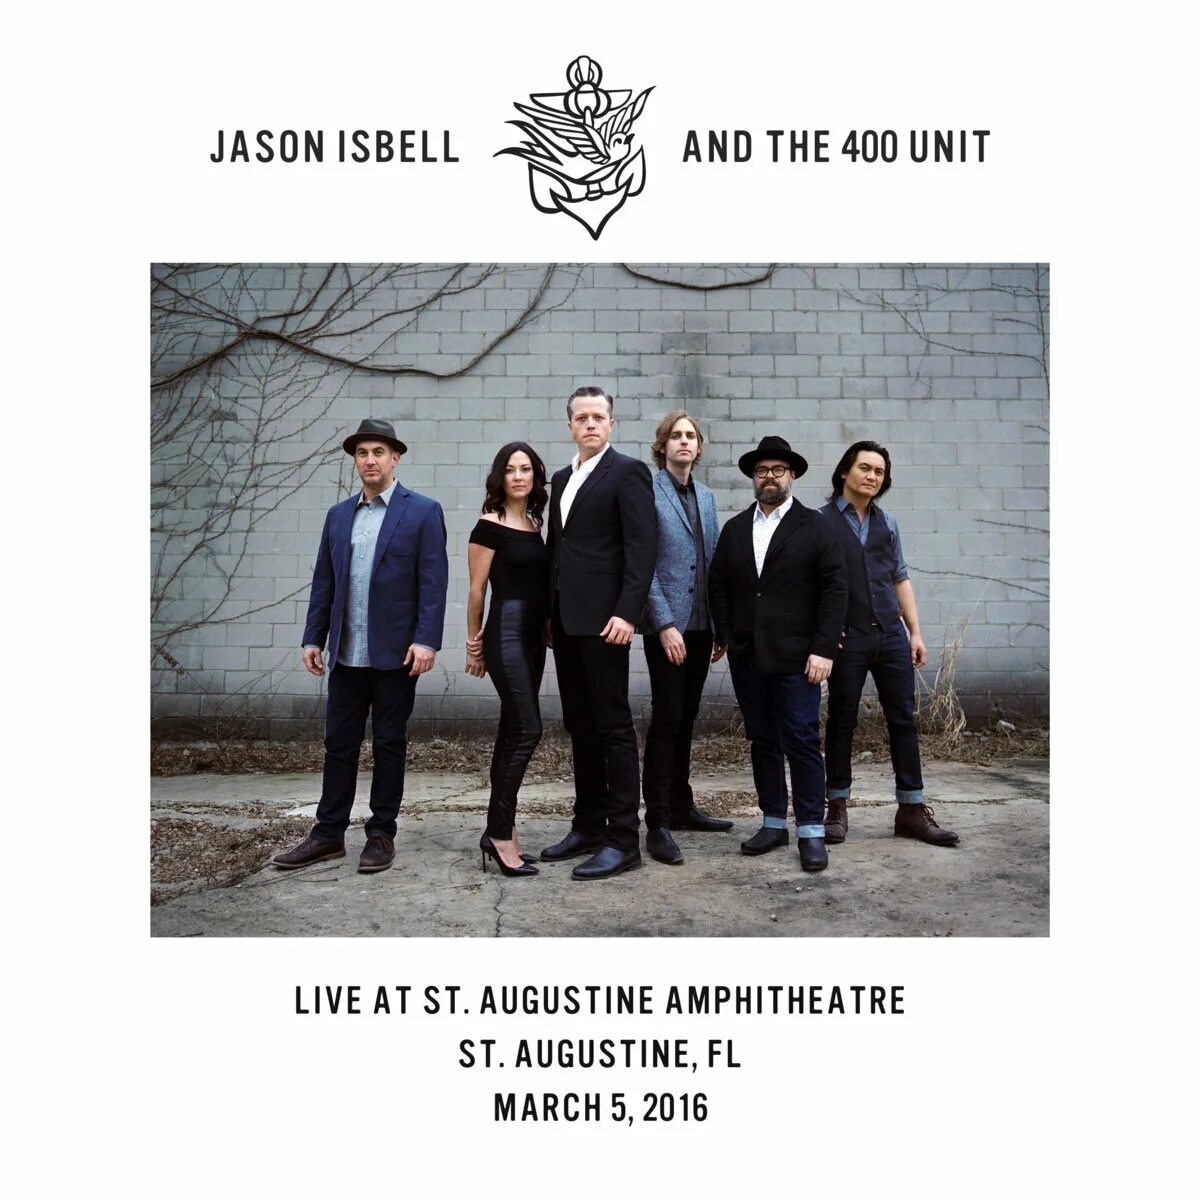 Jason Isbell and the 400 Unit. Jason Isbell. The Nashville Sound Jason Isbell and the 400 Unit. Isbell Blvd. Unit to live